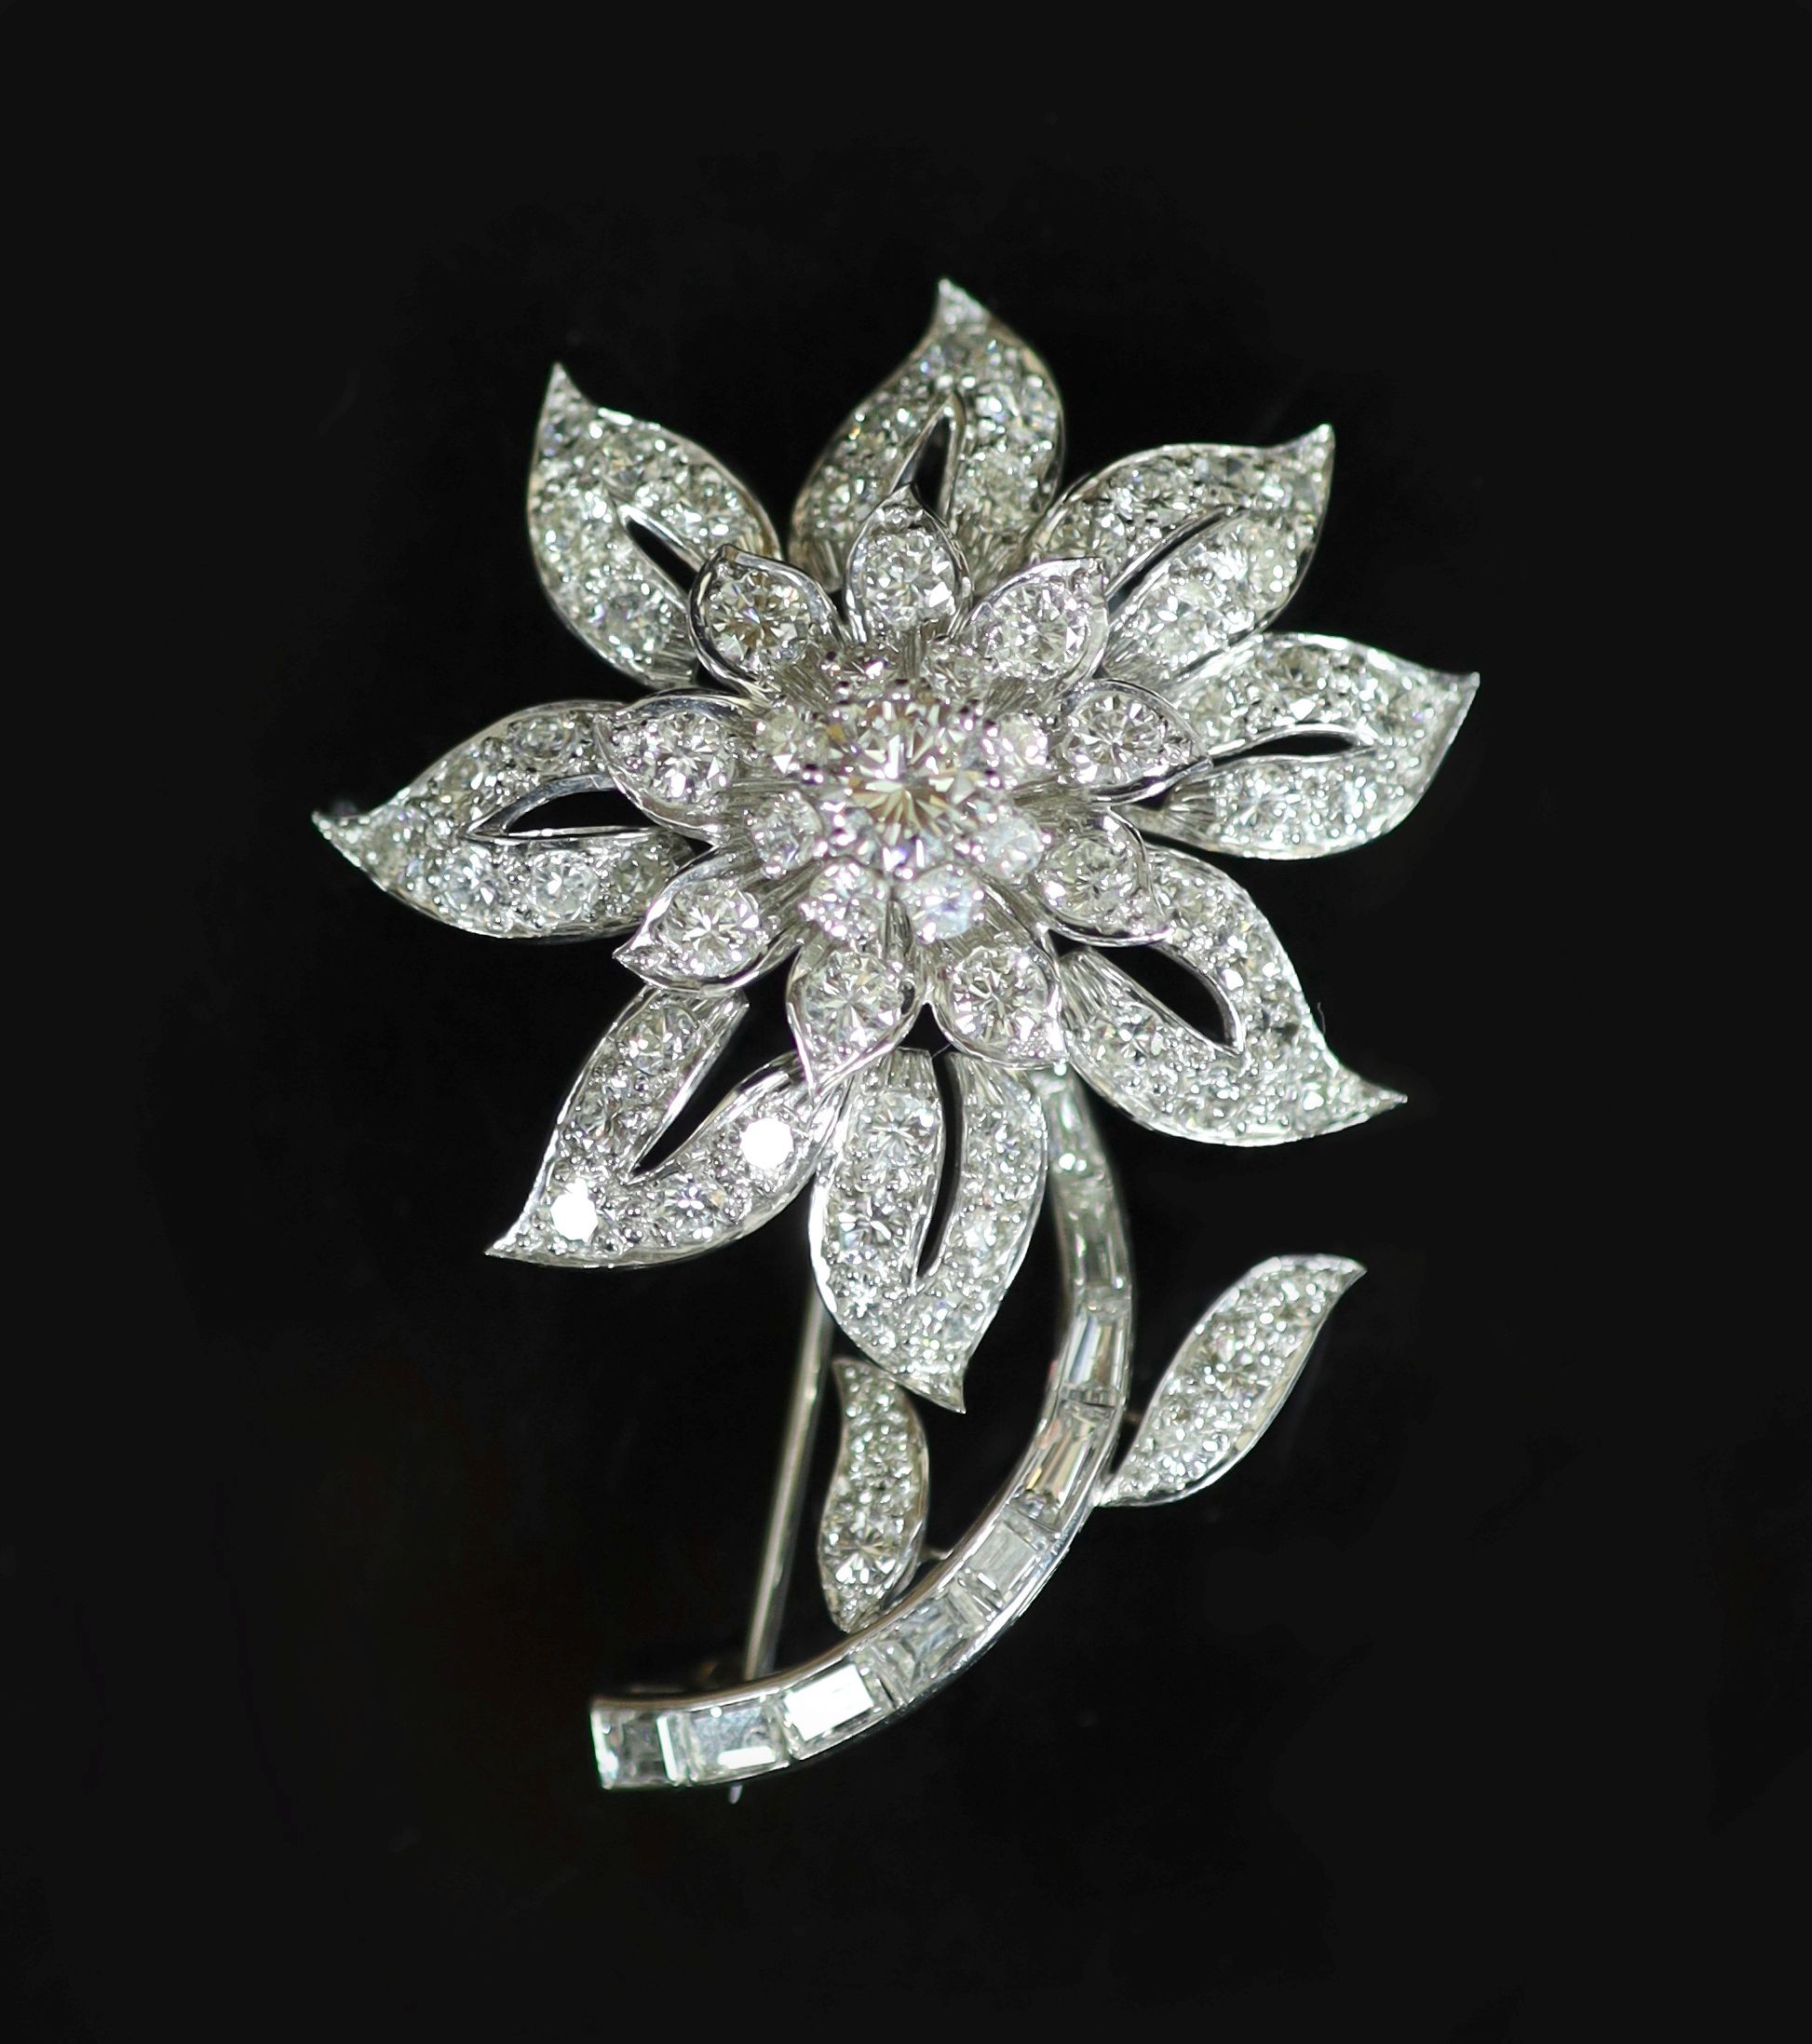 A white gold and diamond encrusted flower brooch